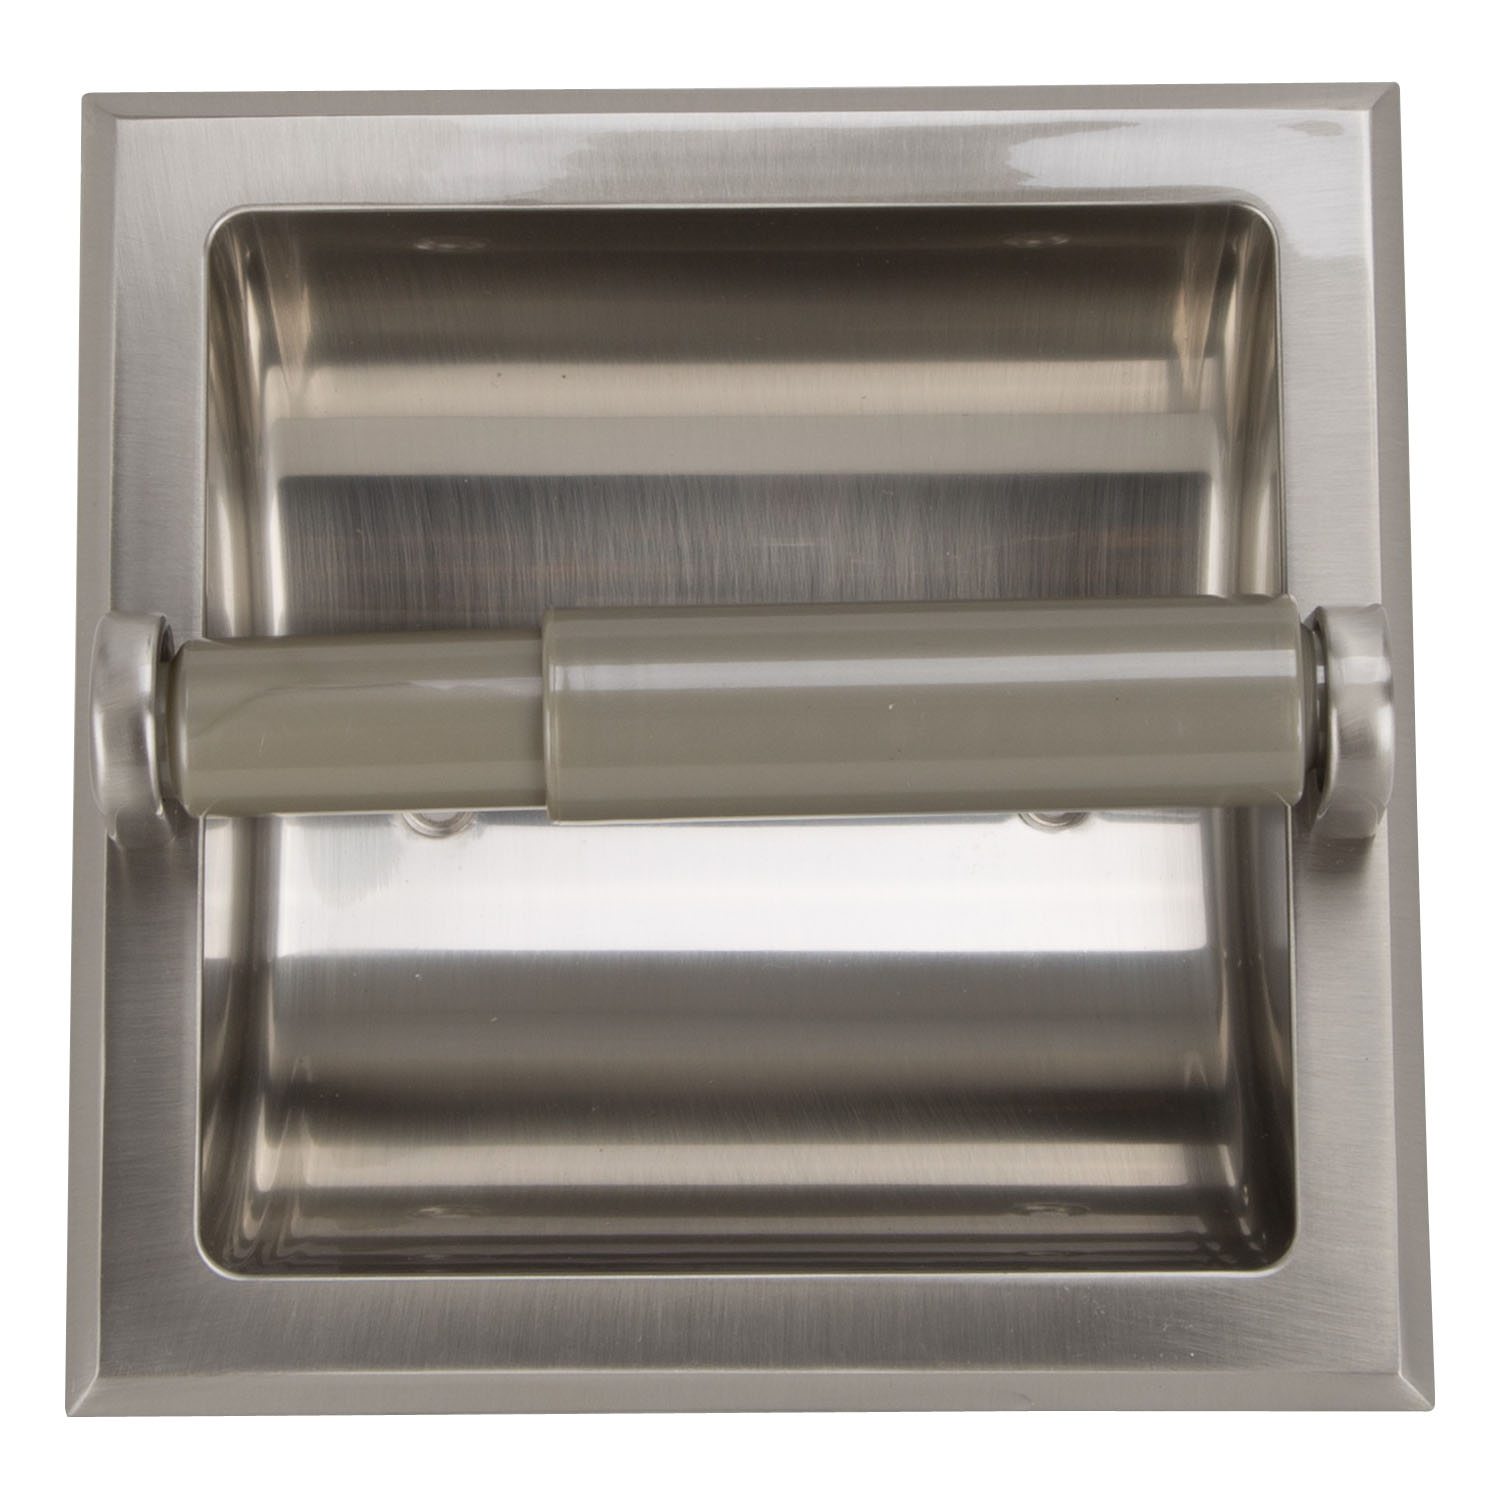 776H-07 Recessed Paper Holder, Plastic/Zinc, Brushed Nickel, Recessed Mounting